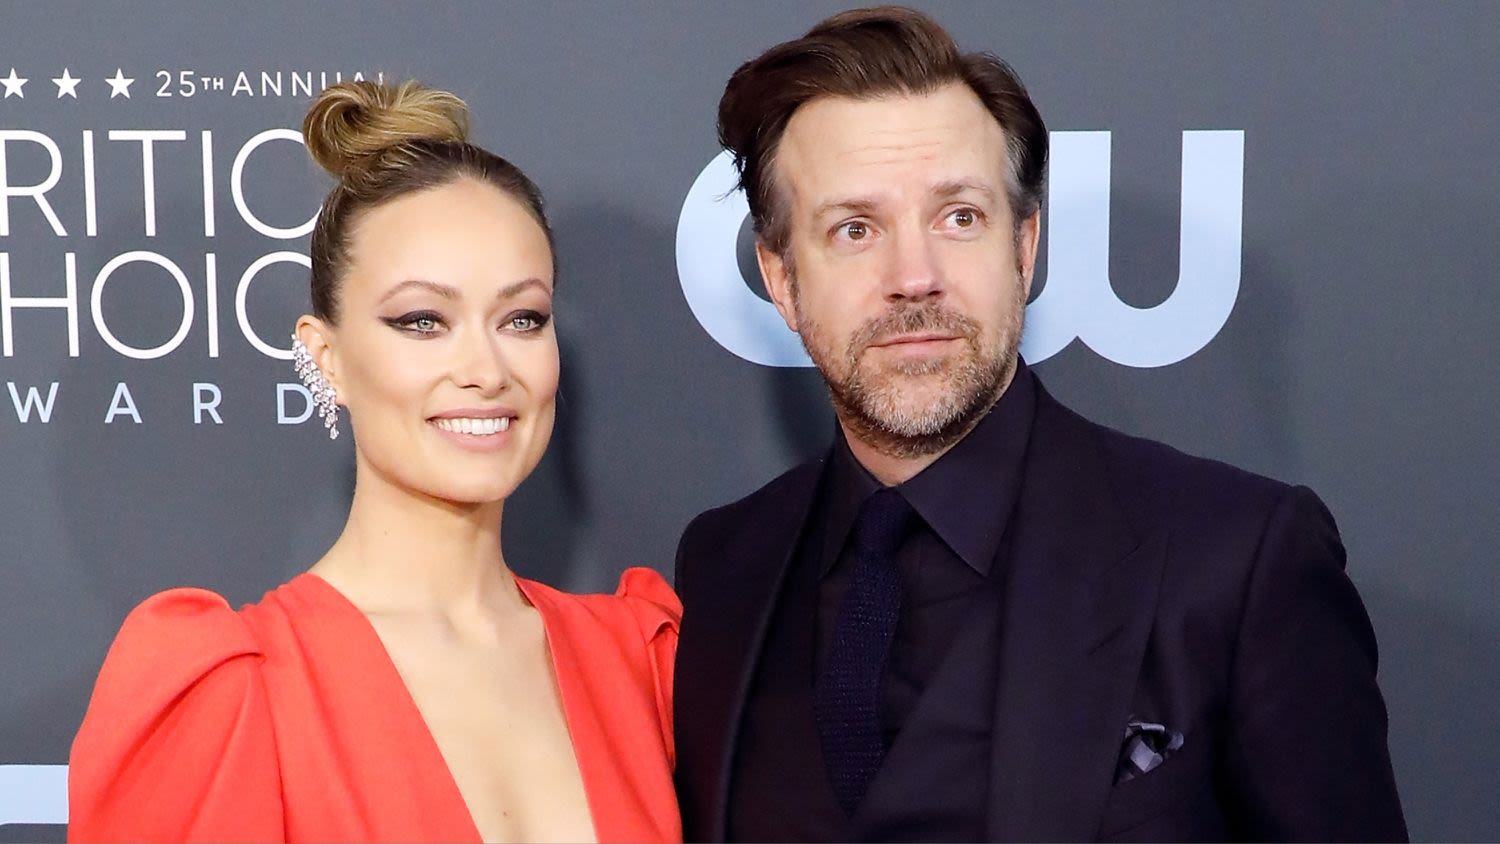 Olivia Wilde Shared a Rare Photo of Her Daughter Daisy, and She Looks Just Like Dad Jason Sudeikis